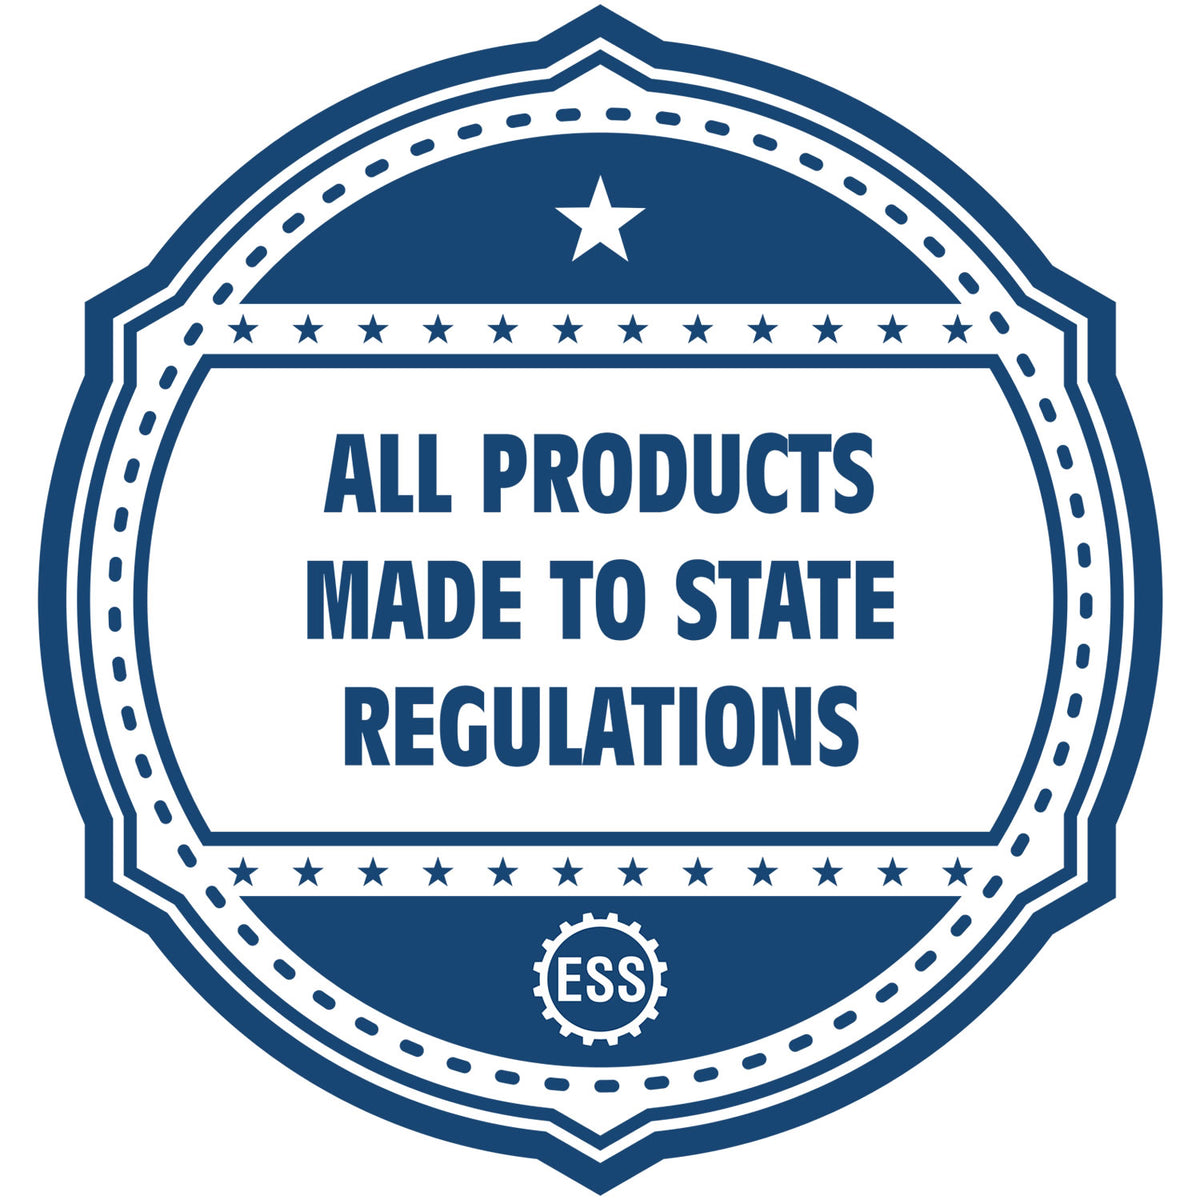 A blue icon or badge for the Hybrid Mississippi Architect Seal showing that this product is made in compliance with state regulations.